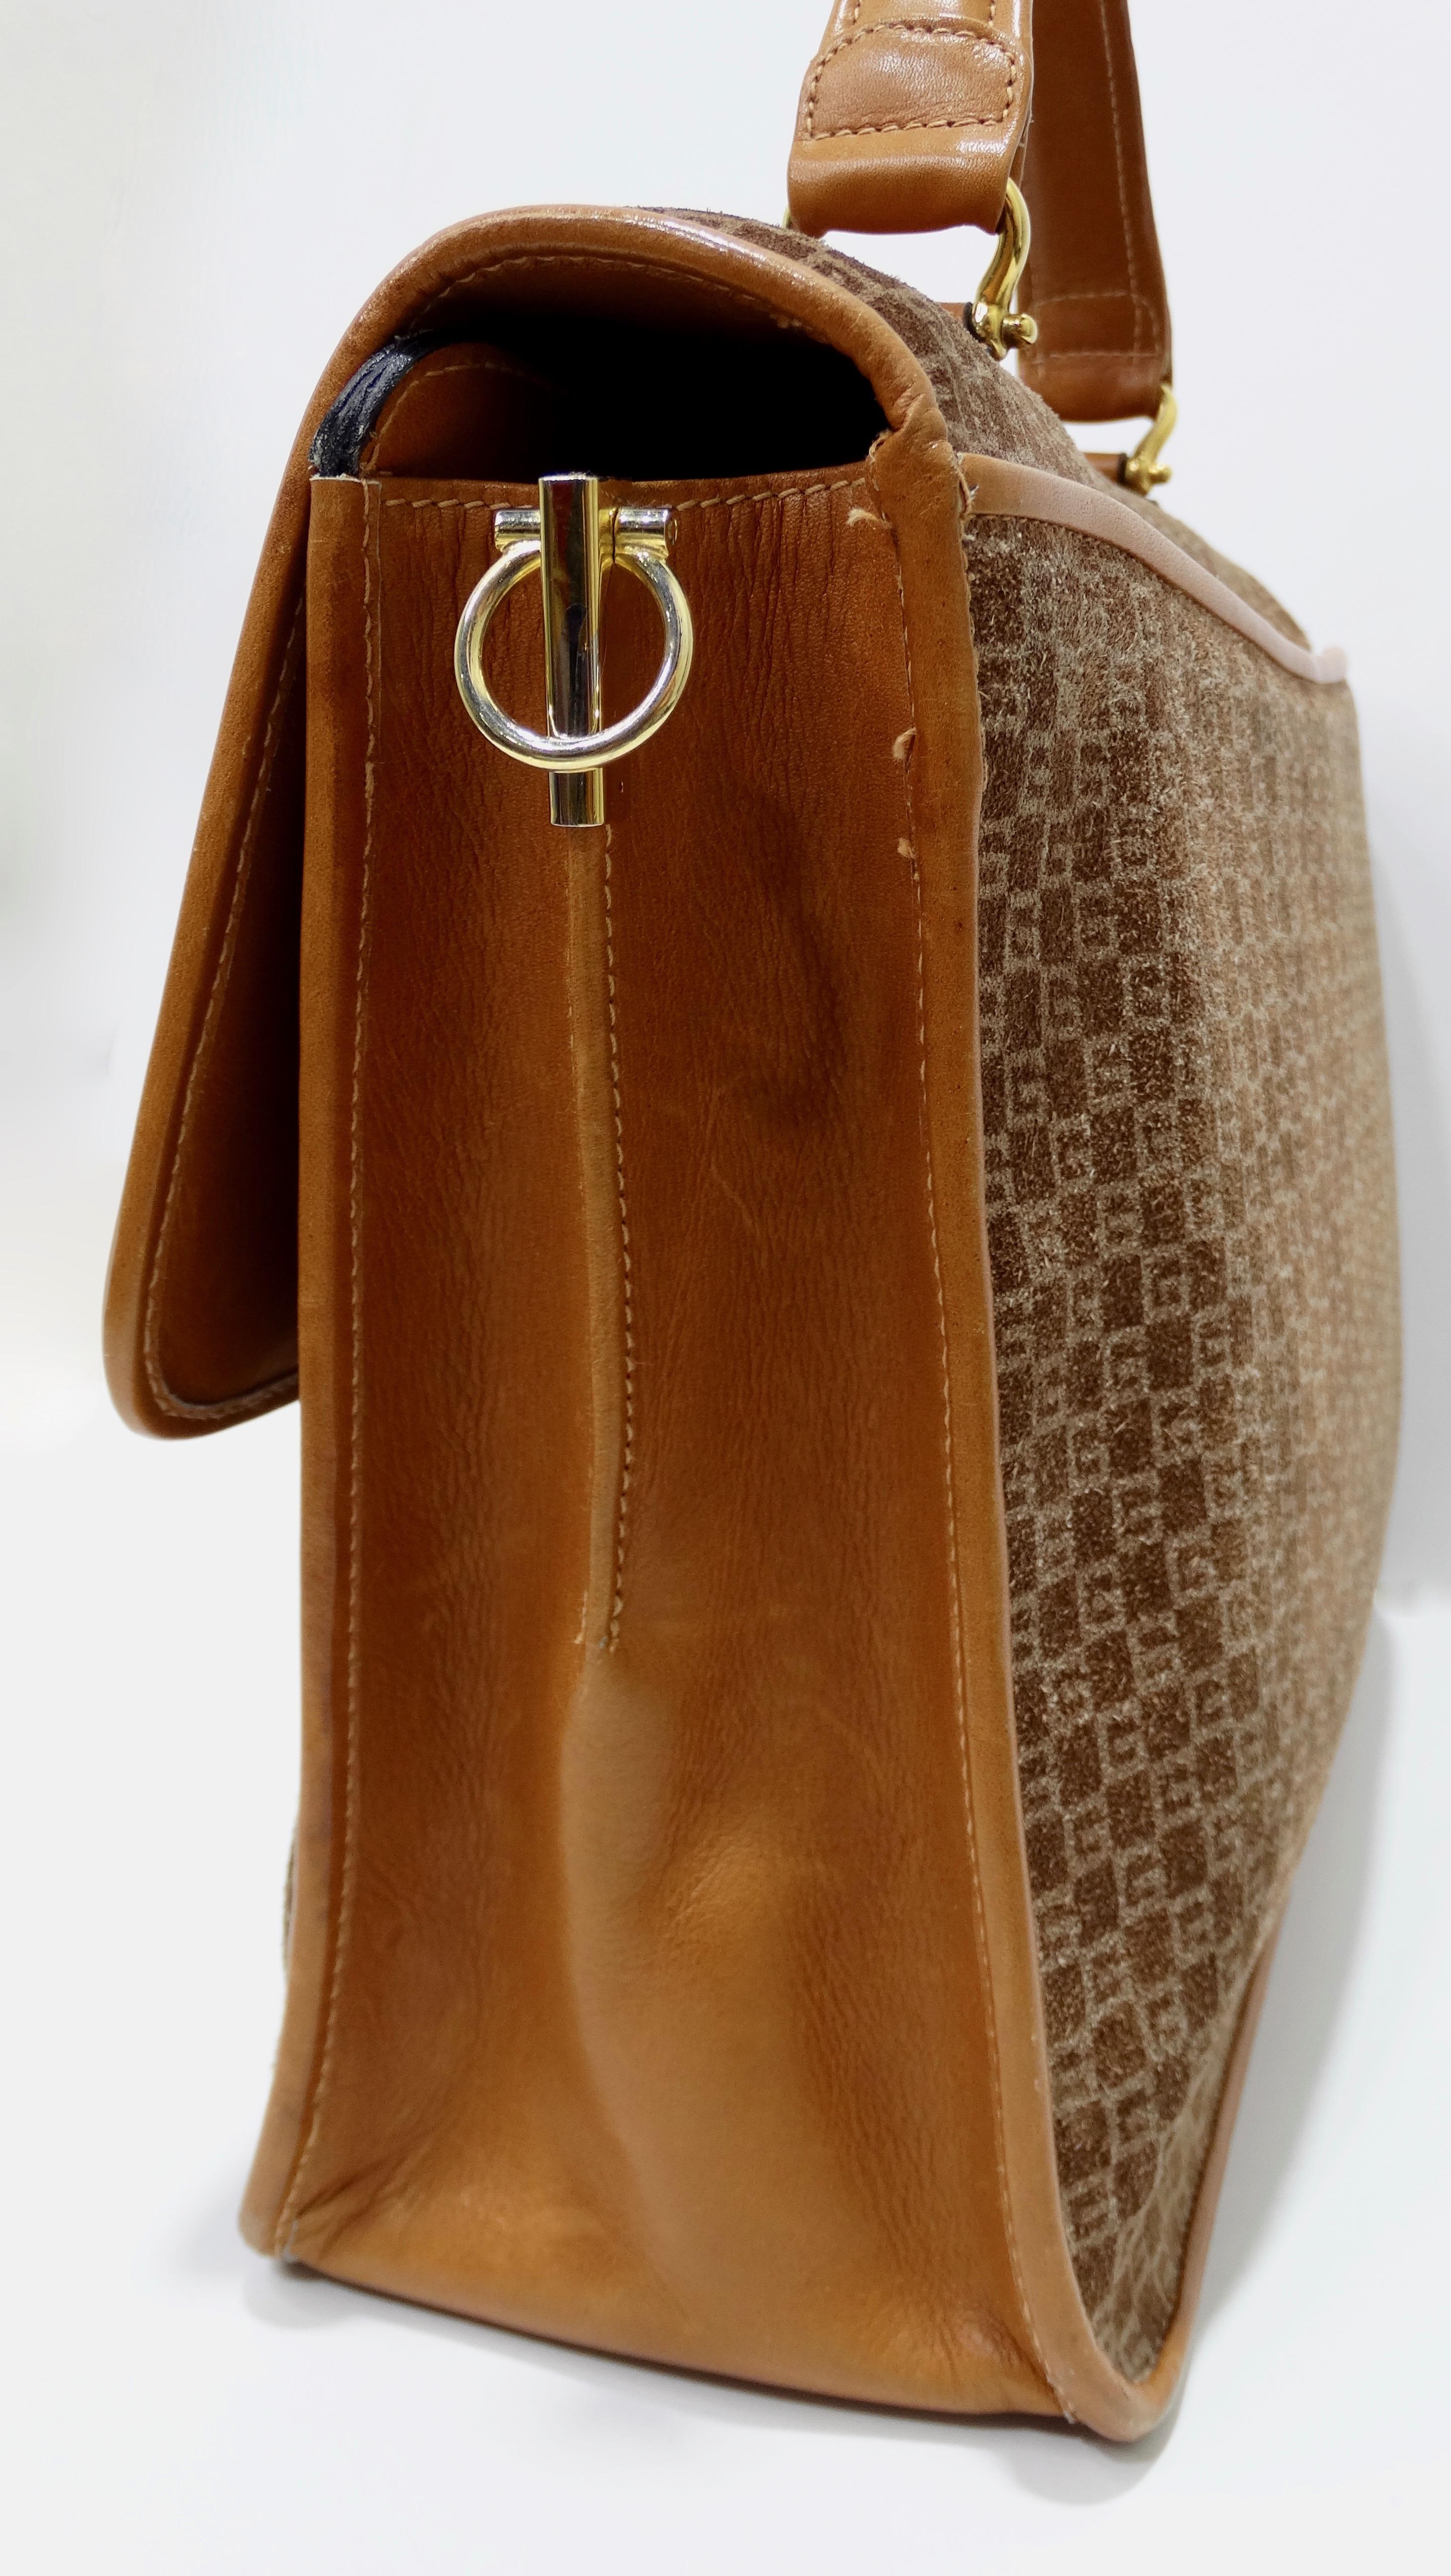 Snag yourself the ultimate Gucci bag! Circa 1970s, this satchel features brown and tan monogram suede, gold plated hardware, single flat top handle, patch pocket on the back face, tan leather piping, an optional flat shoulder strap, and a pull-